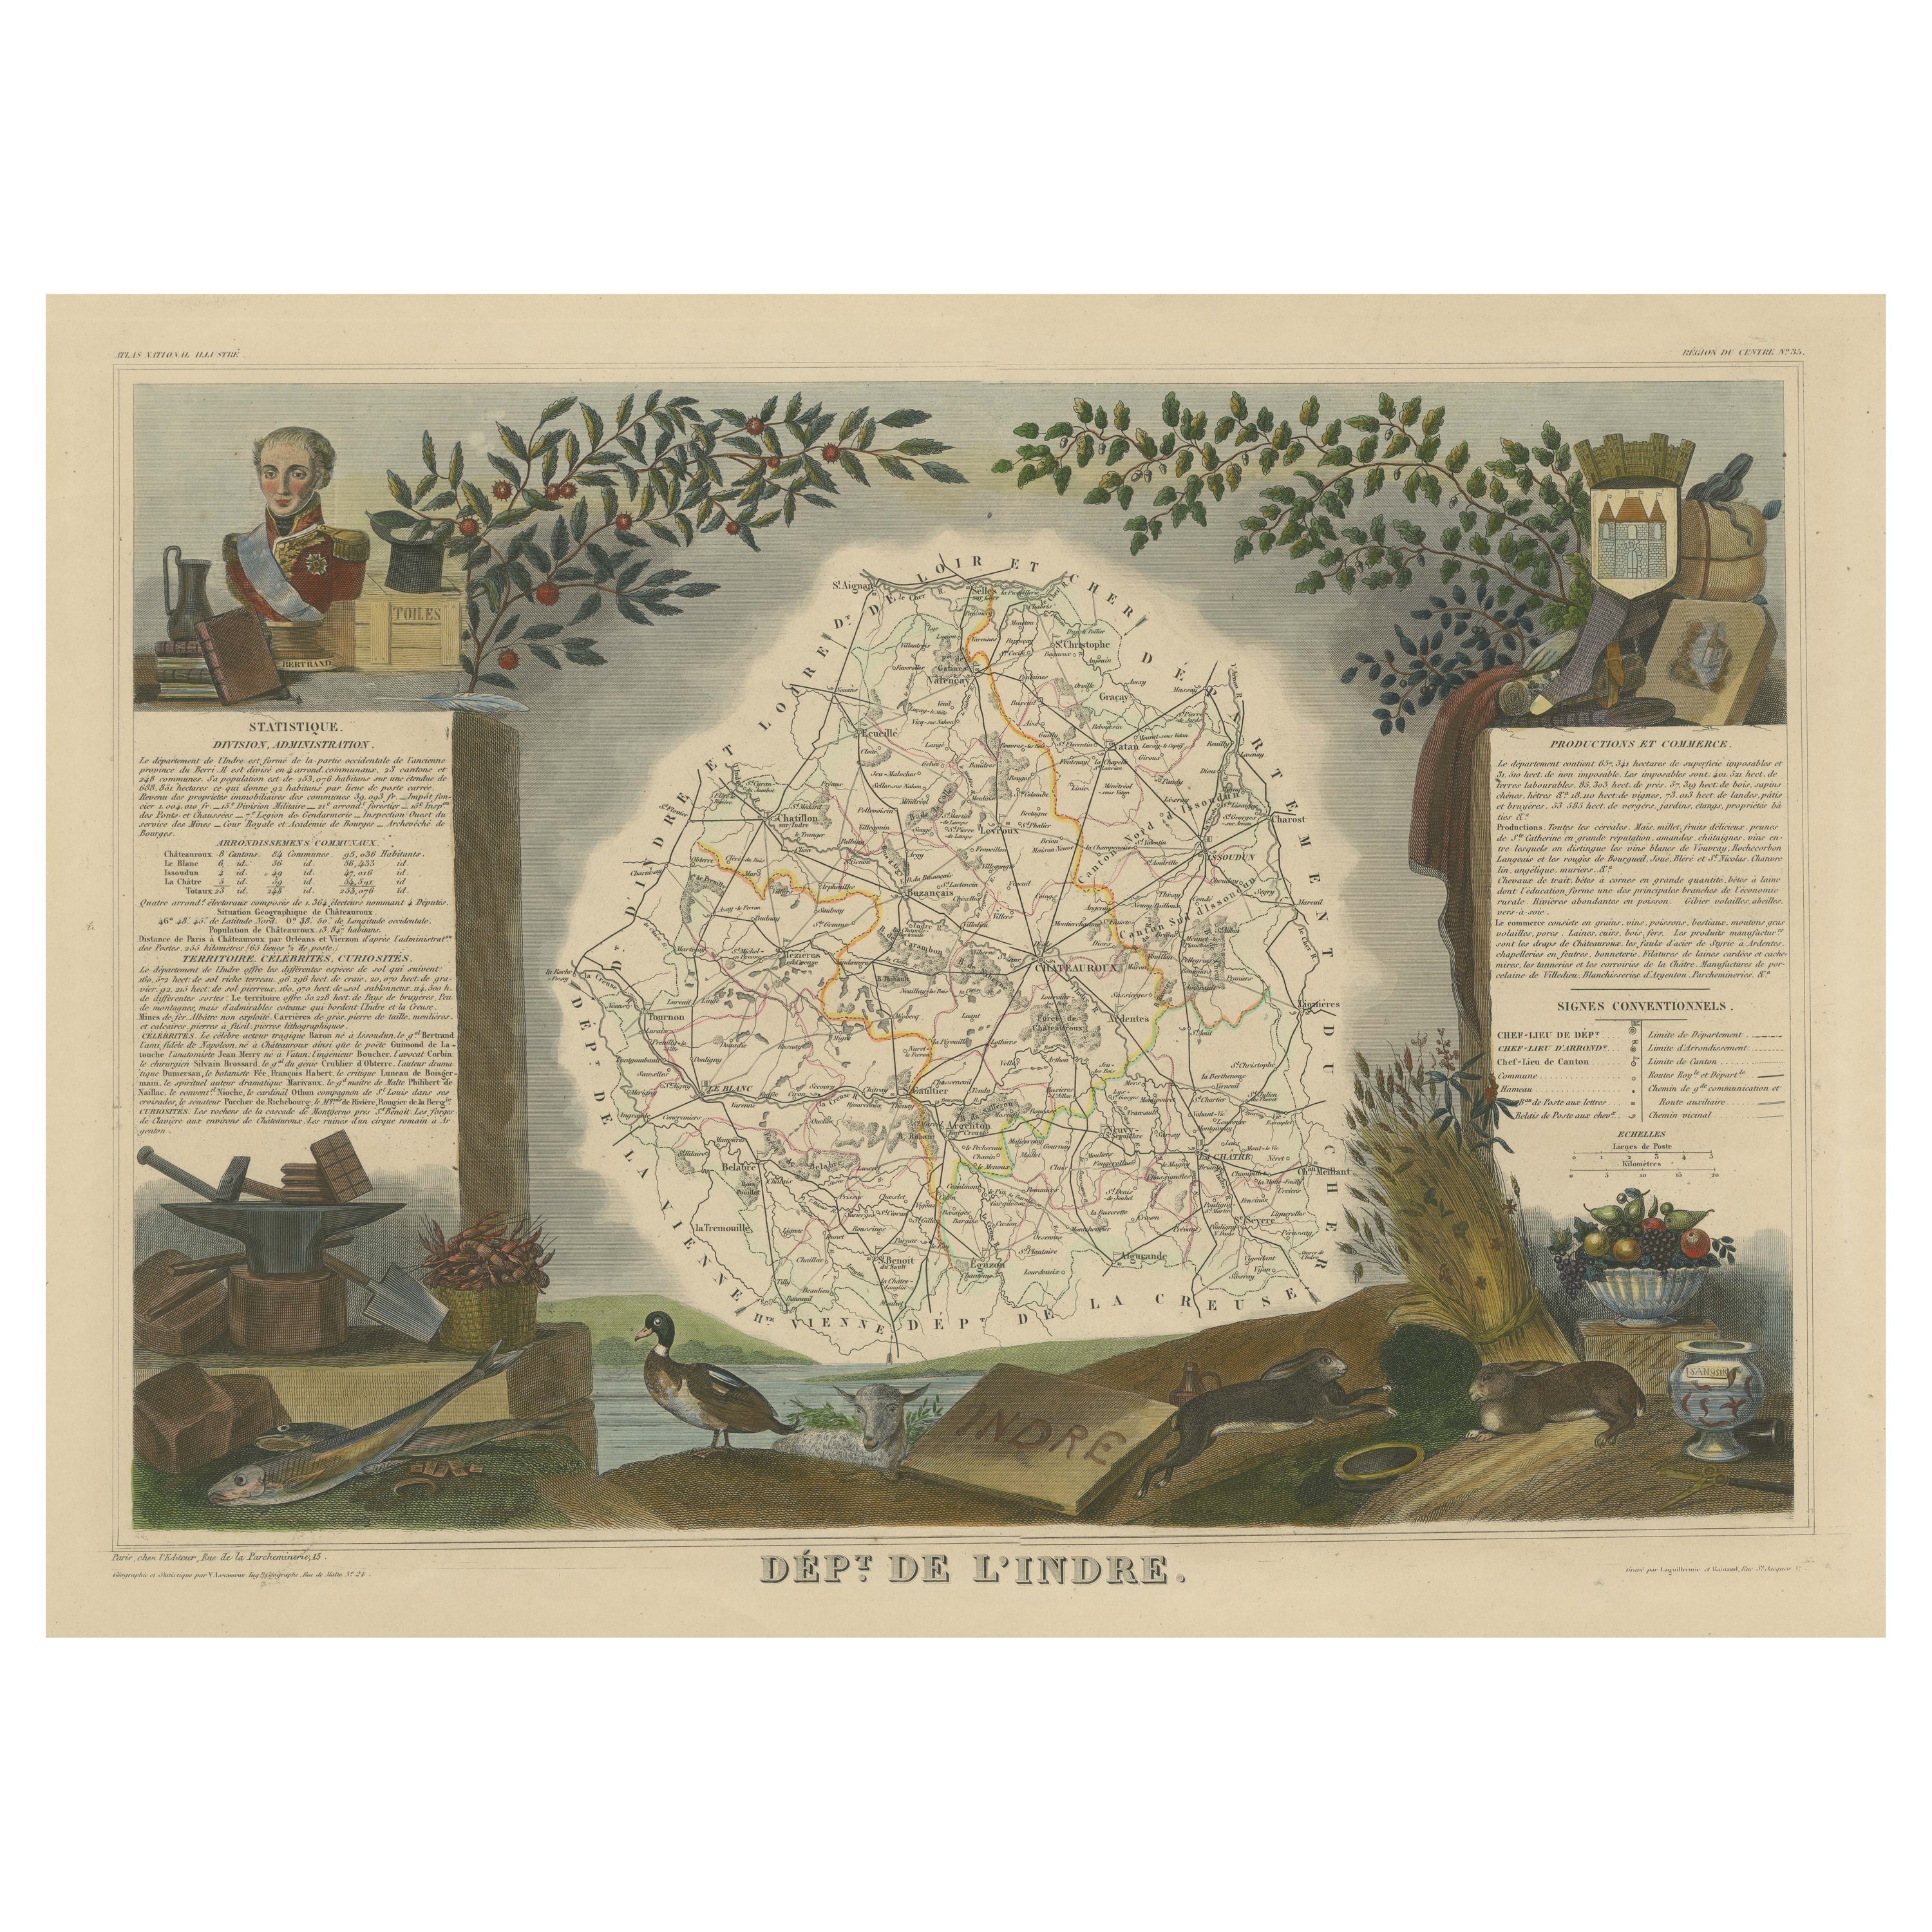 Old Map of the French Department of Indre, France For Sale